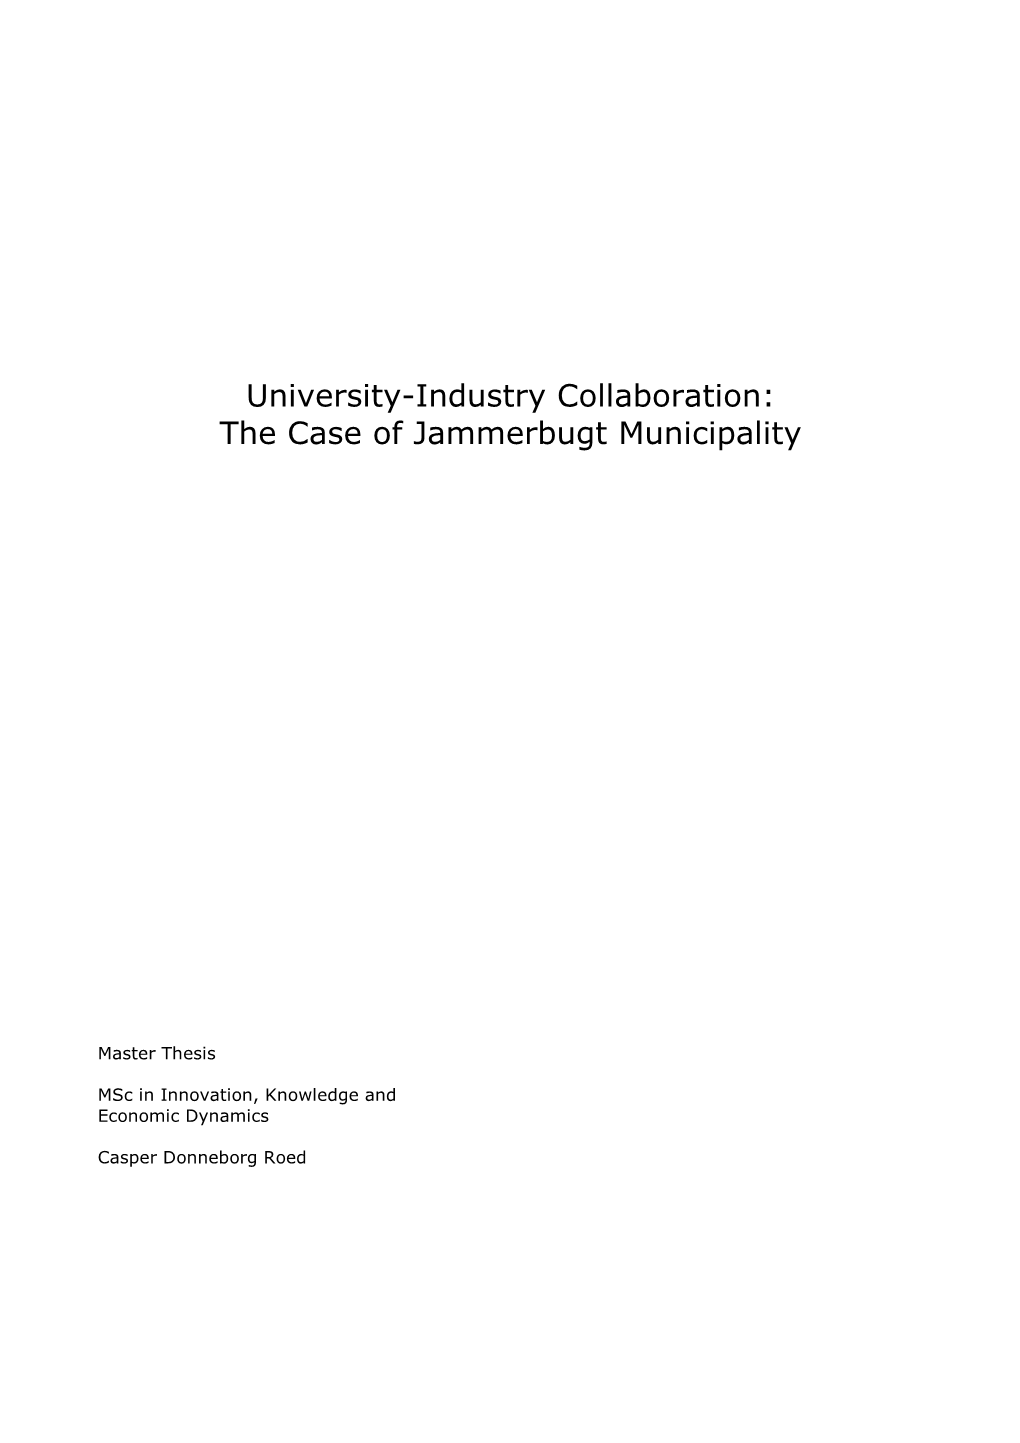 University-Industry Collaboration: the Case of Jammerbugt Municipality